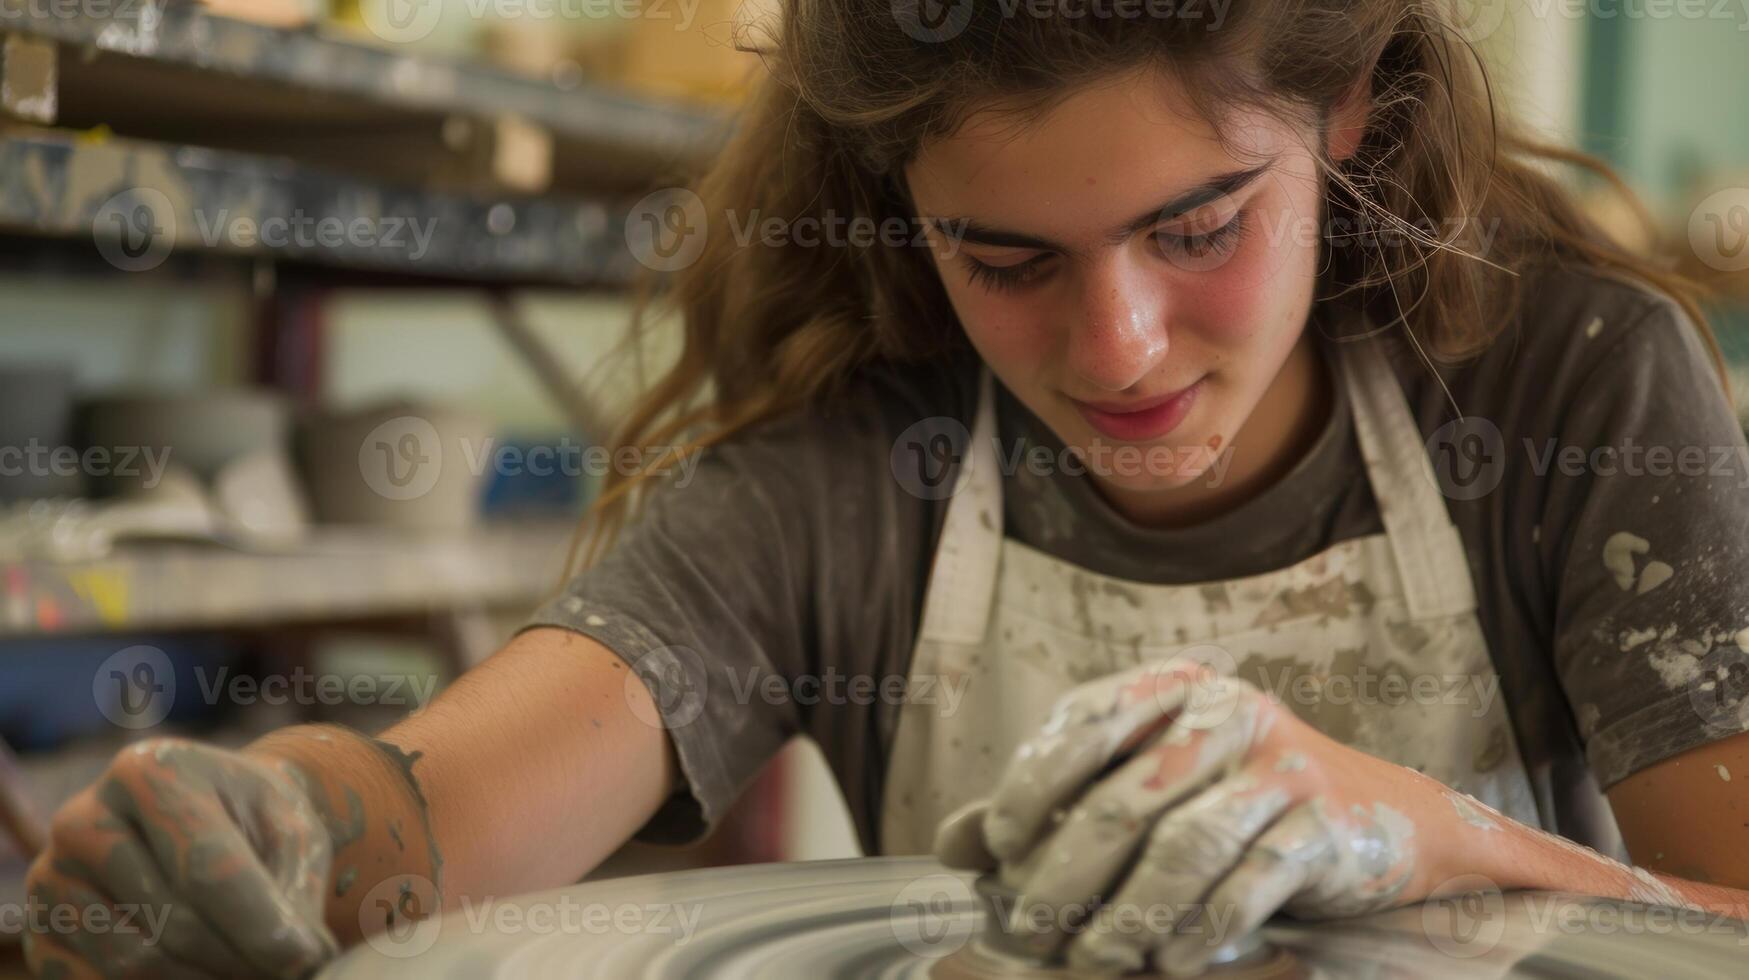 A student intently focusing on centering the clay on the wheel with determination in their eyes. photo